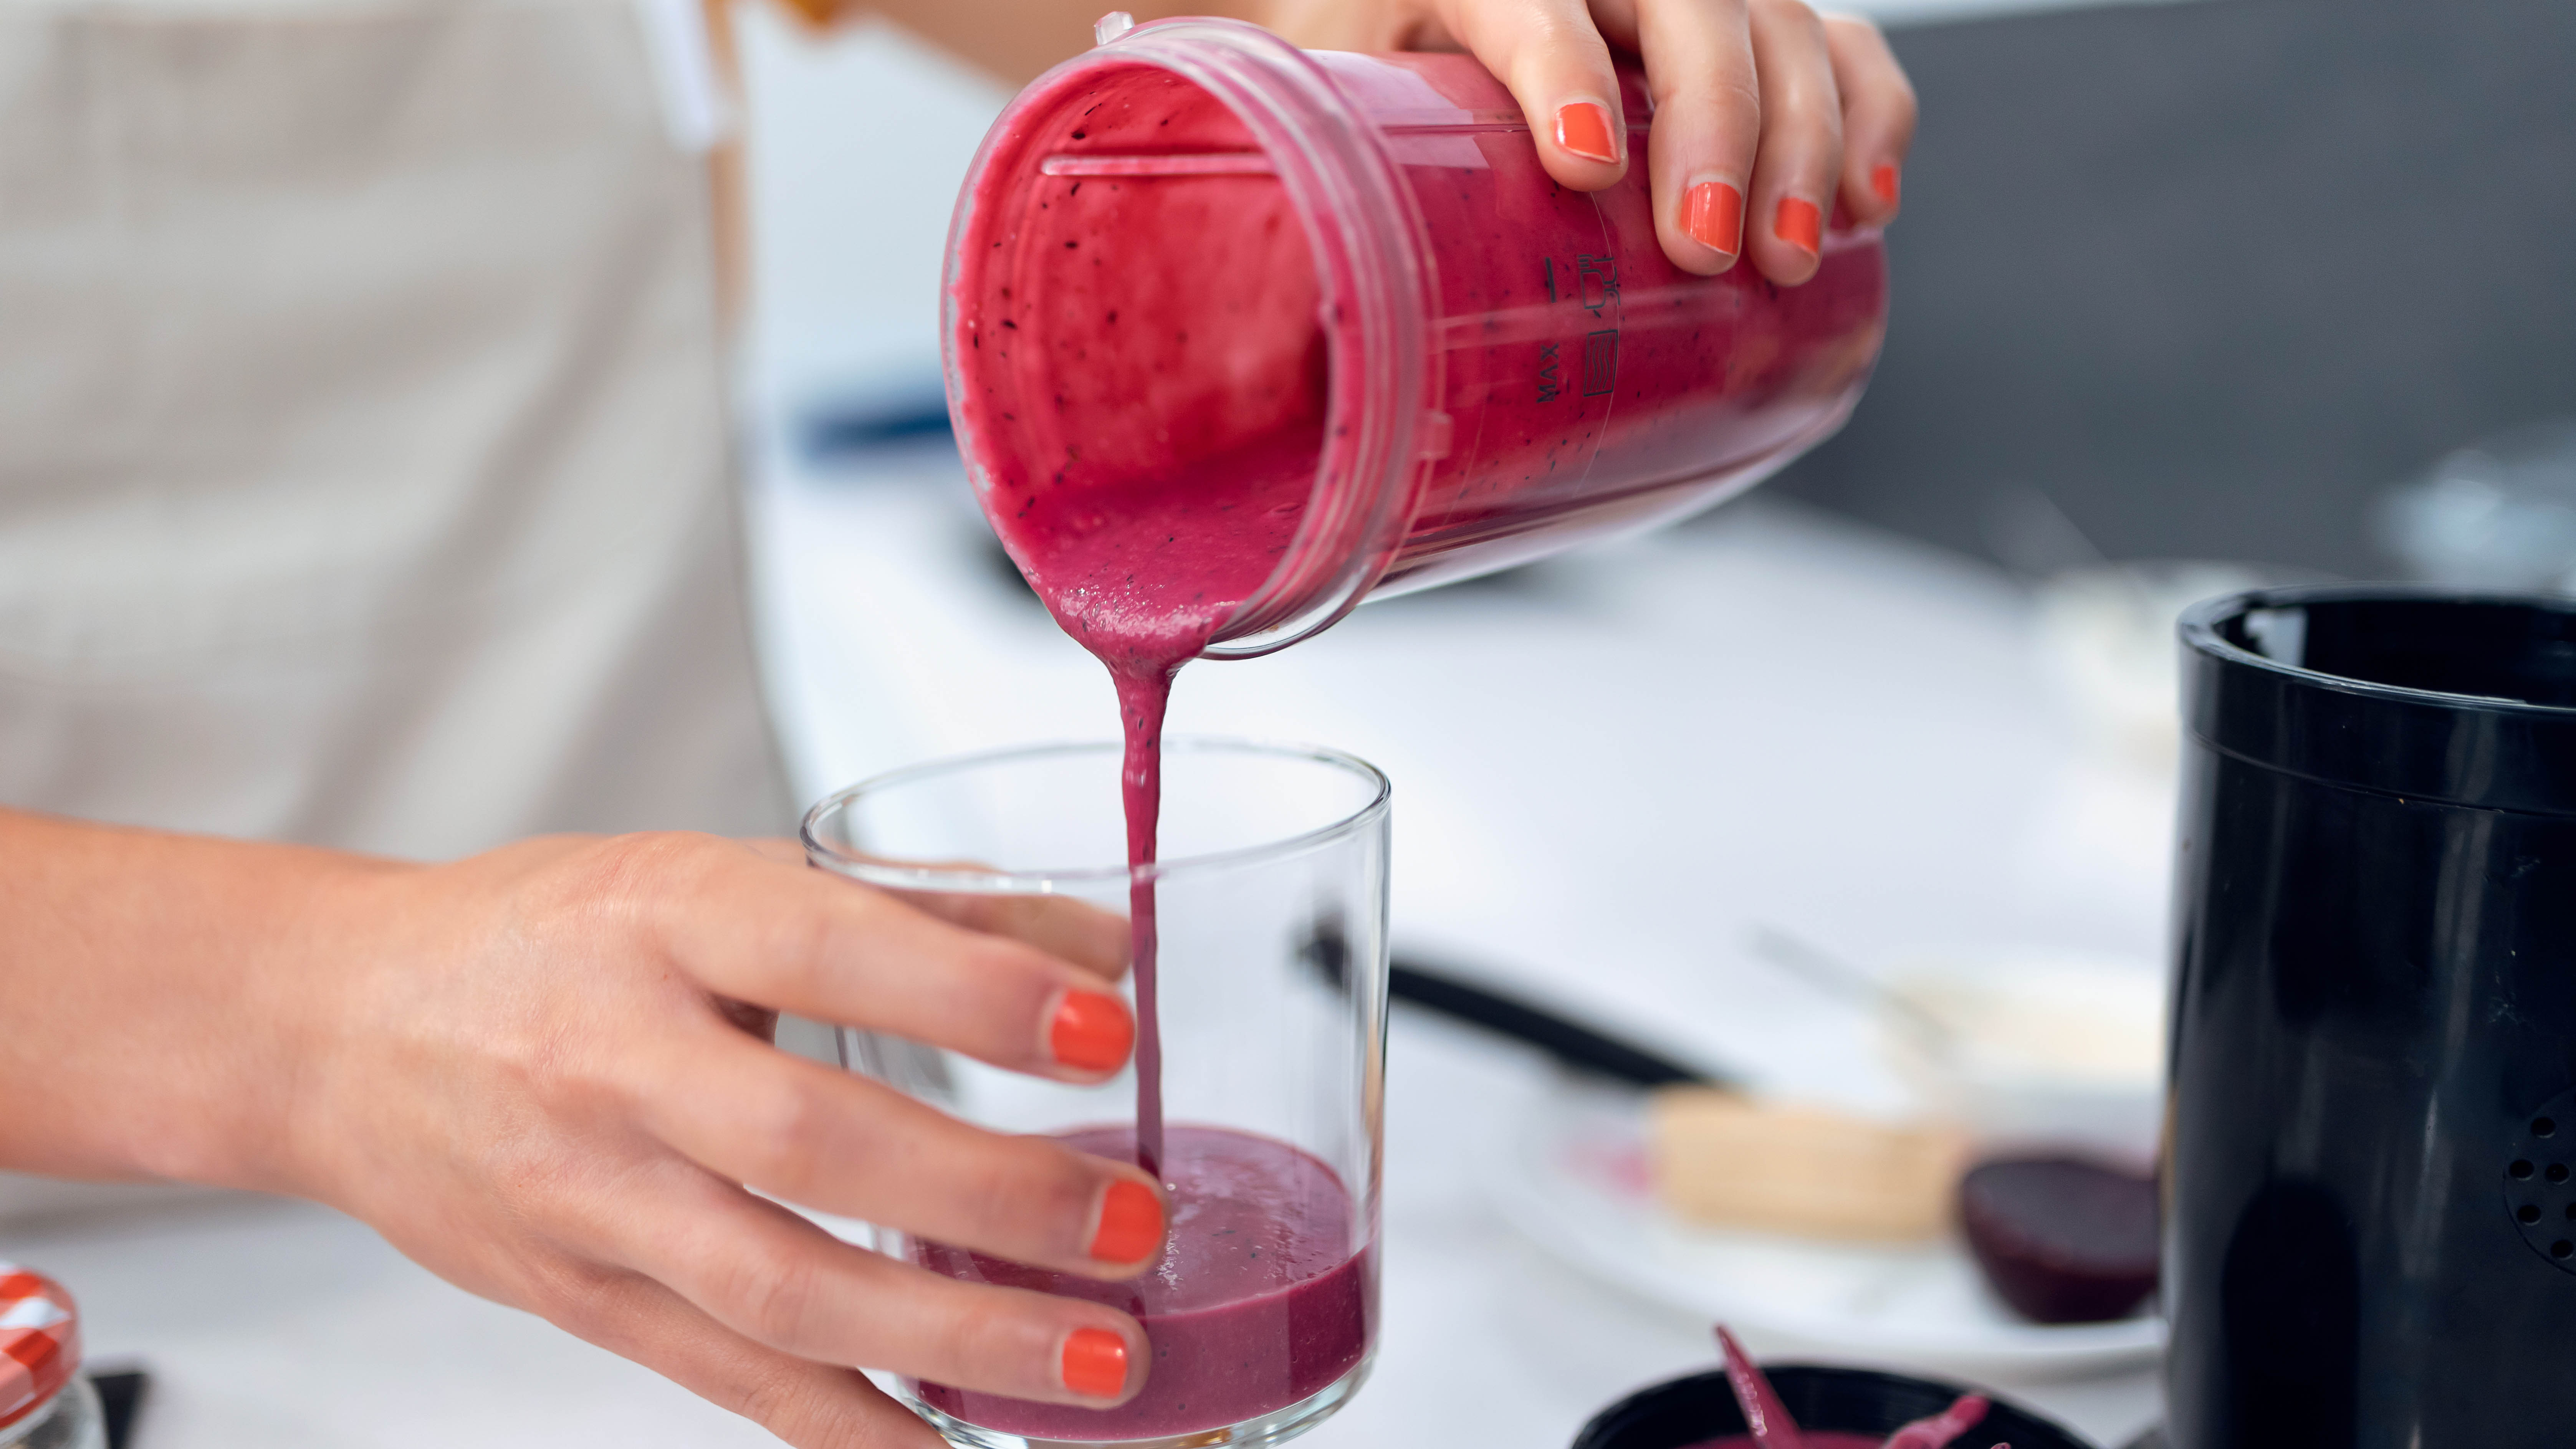 A personal blender stirs the blueberry juice into a glass